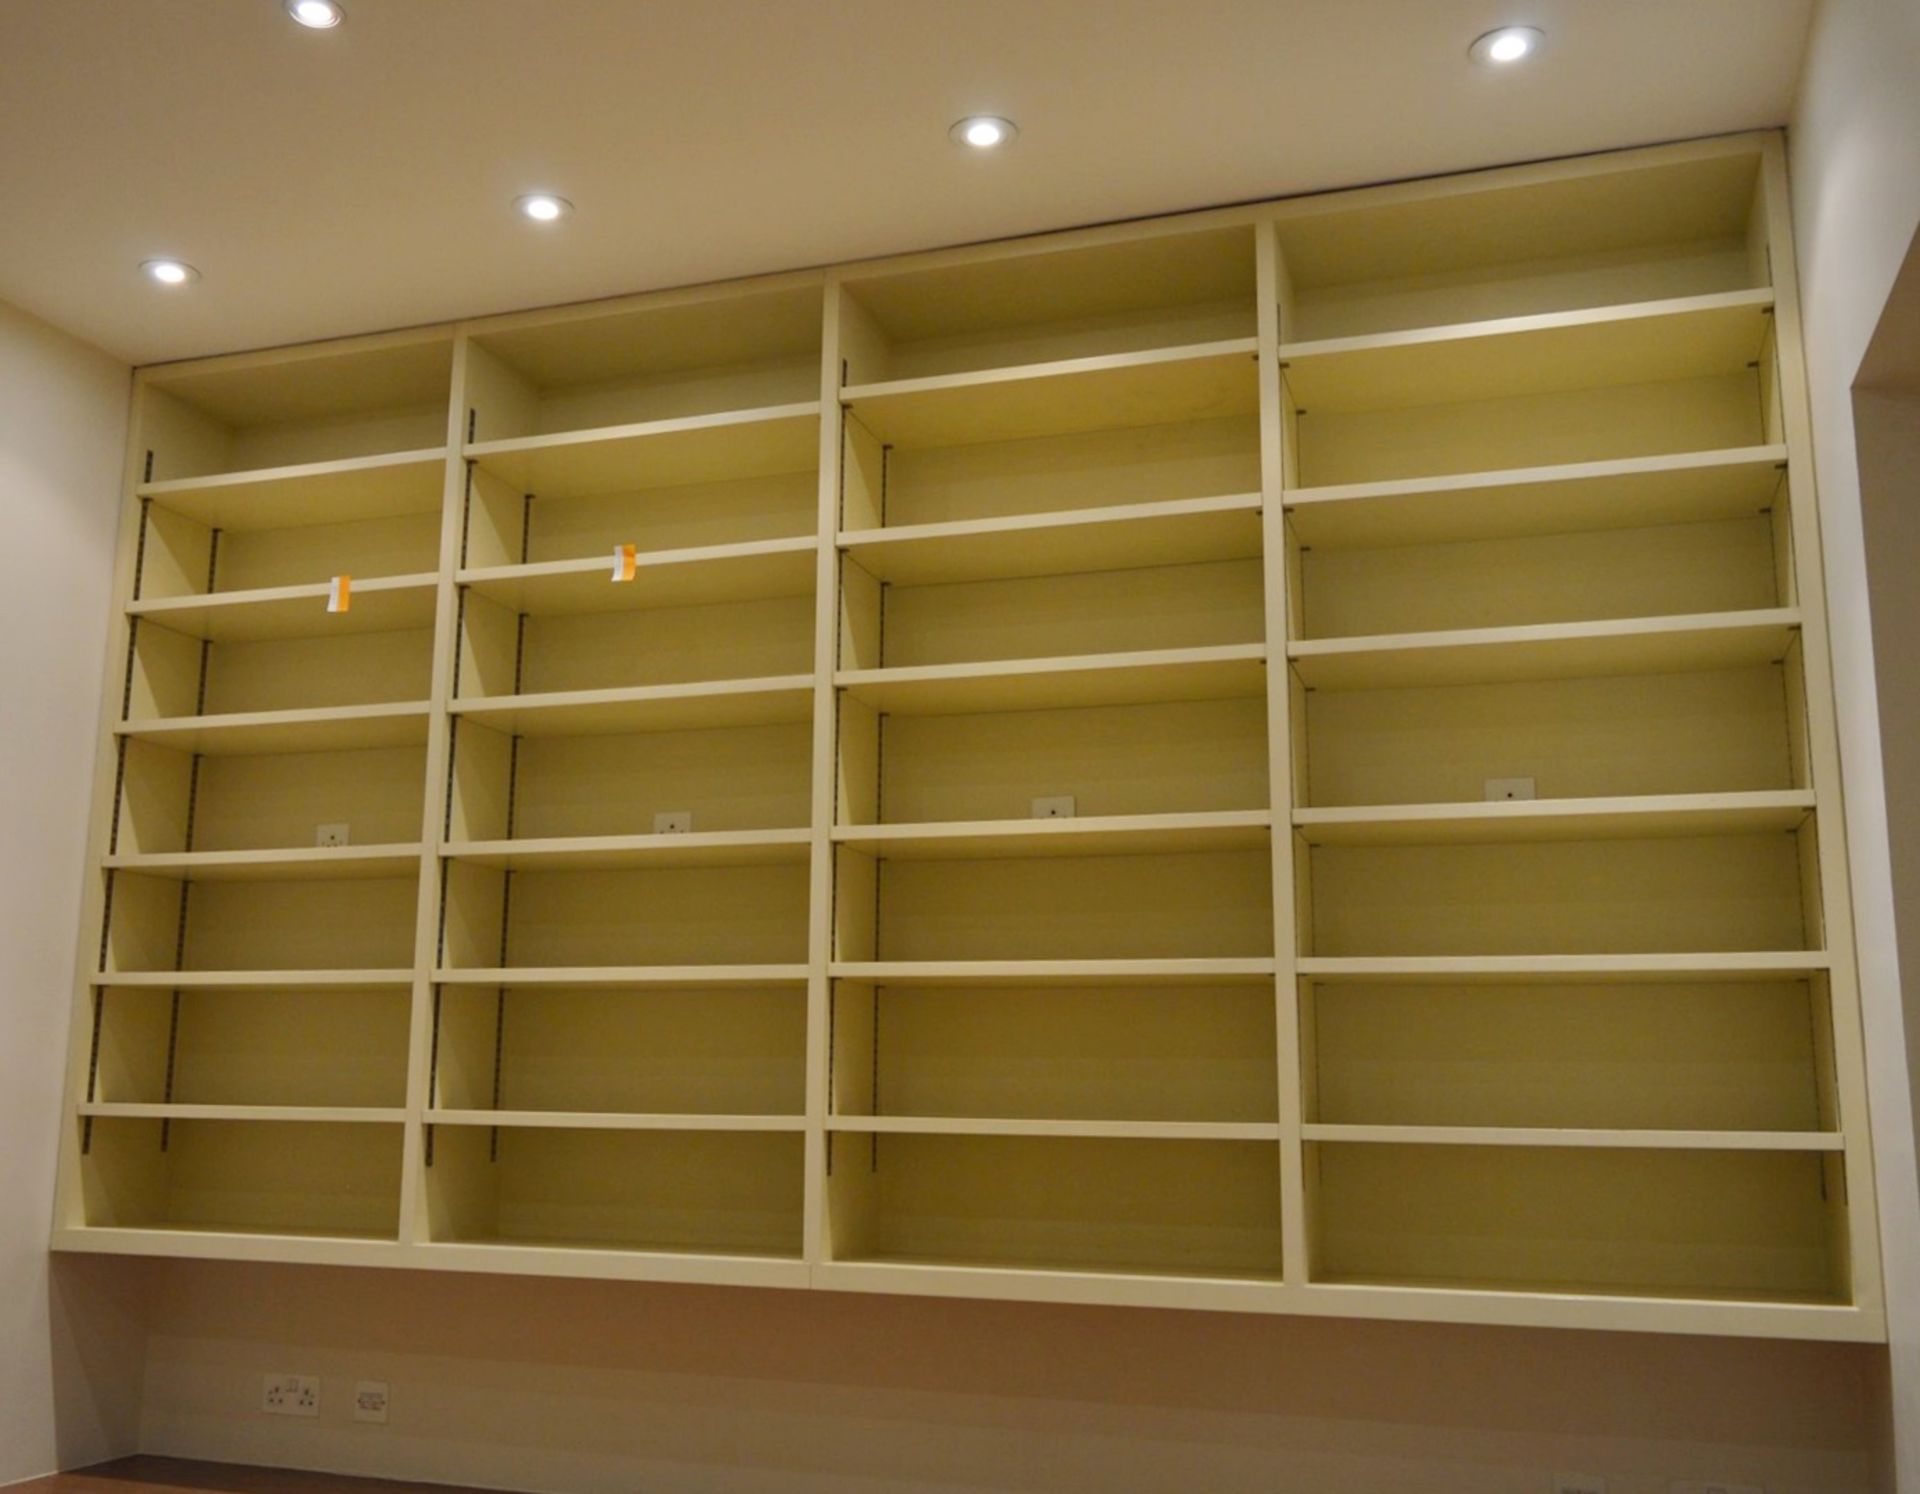 1 x Office Storage Room Including Two Sections of Adjustable Storage Shelvings and Oak Sideboard - Image 9 of 18